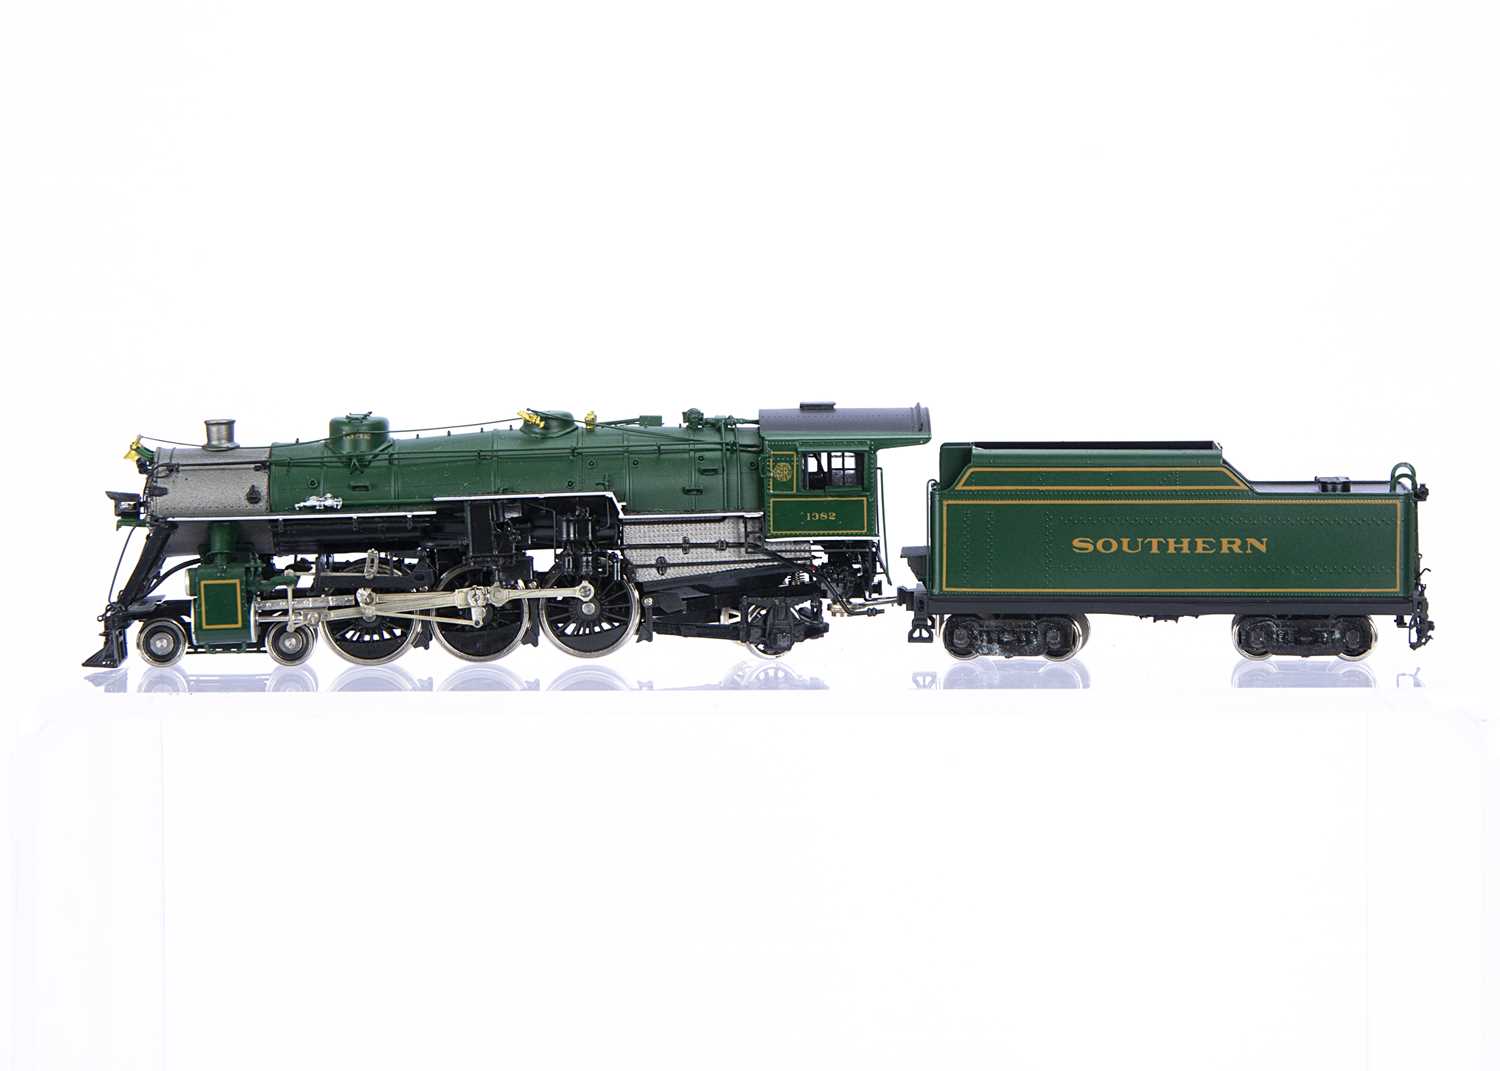 Lot 876 - Iron Horse Models by Precision Scale Co H0 Gauge Southern 4-6-2 PS-4 W/Walschaert's Valve Gear 10,000 Gallon Tender Factory Painted #1382, PSC #16804-1